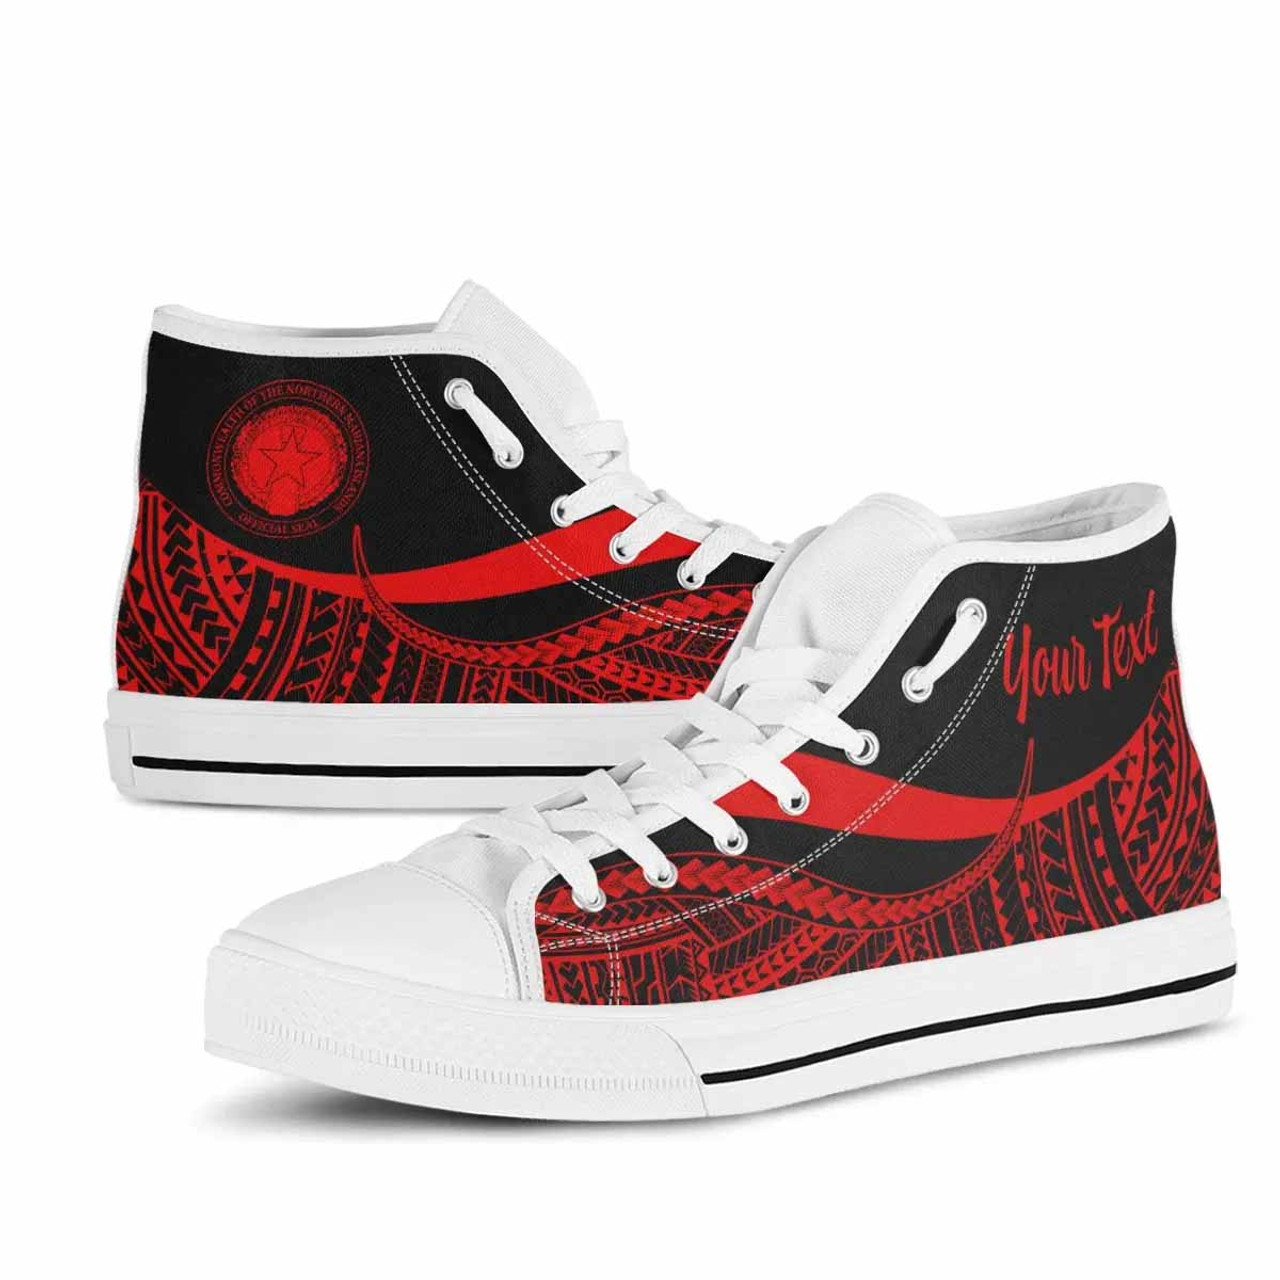 Northern Mariana Islands Custom Personalised High Top Shoes Red - Polynesian Tentacle Tribal Pattern 8